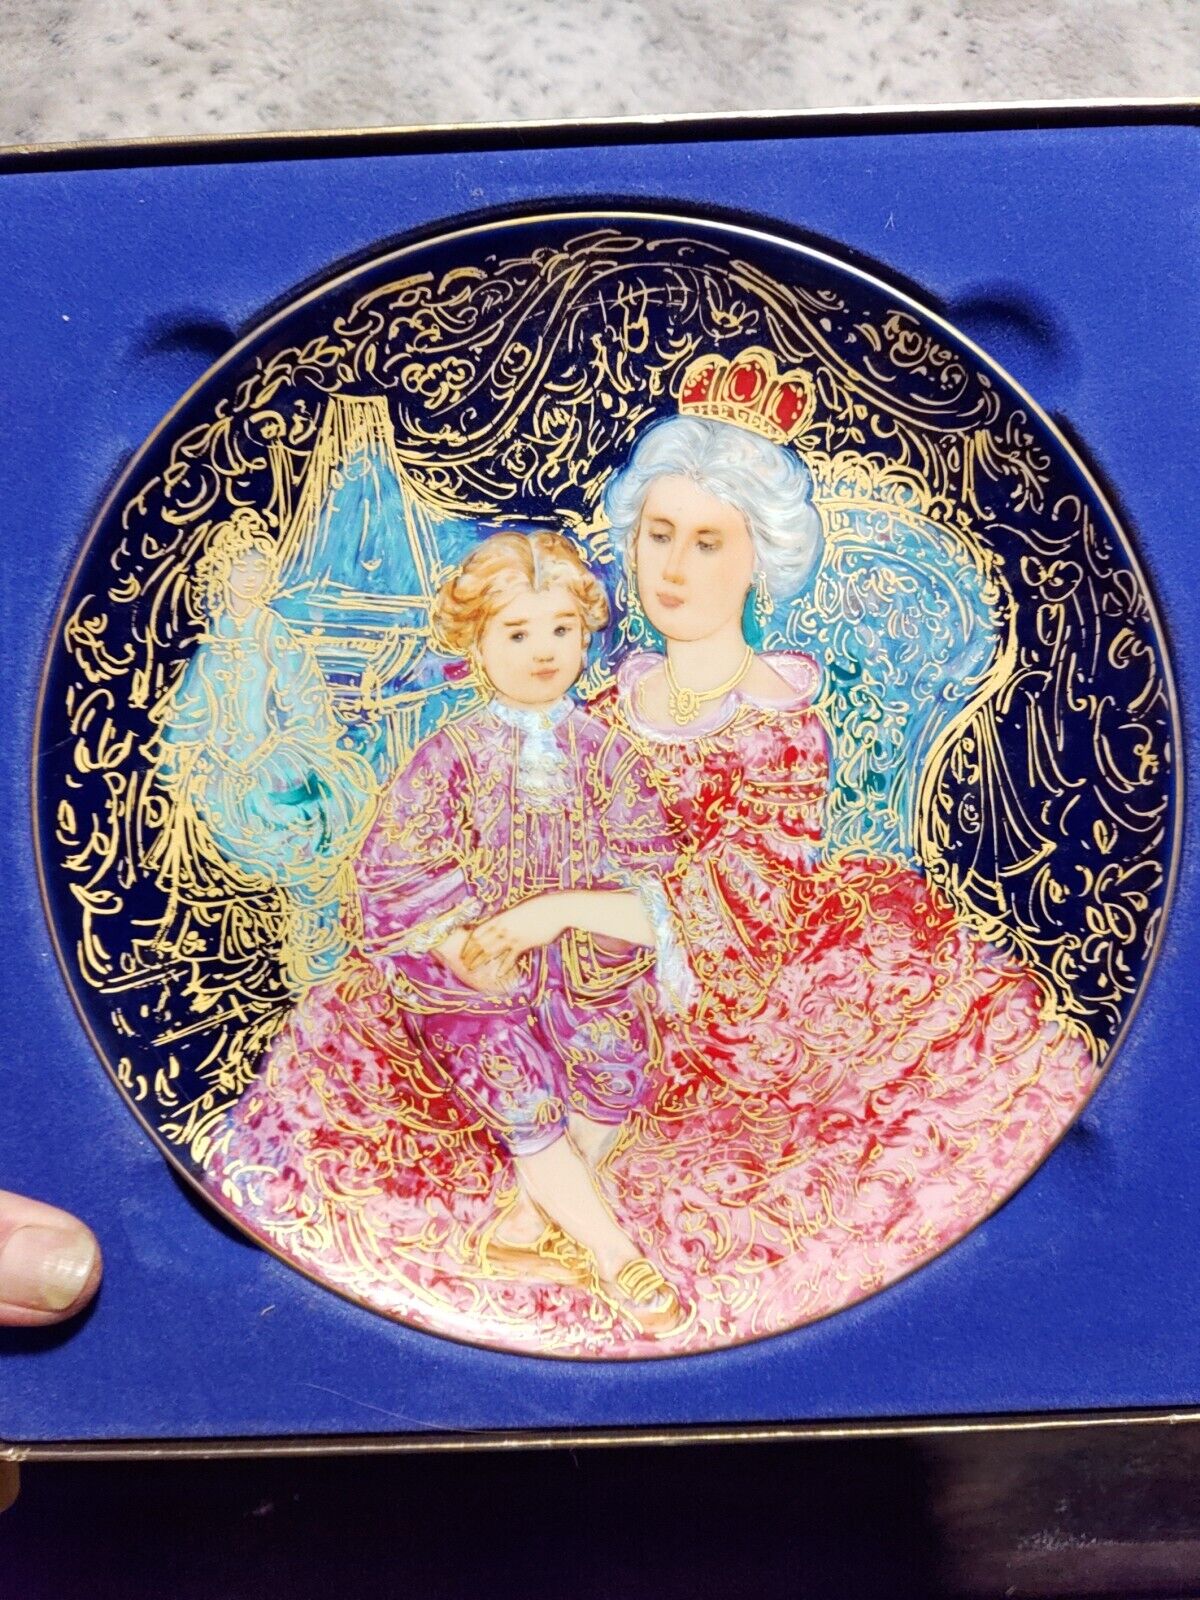 New Edna Hibel Plate Mozart and The Empress Maria Theresa #1032 of 3,000 📸 Sale